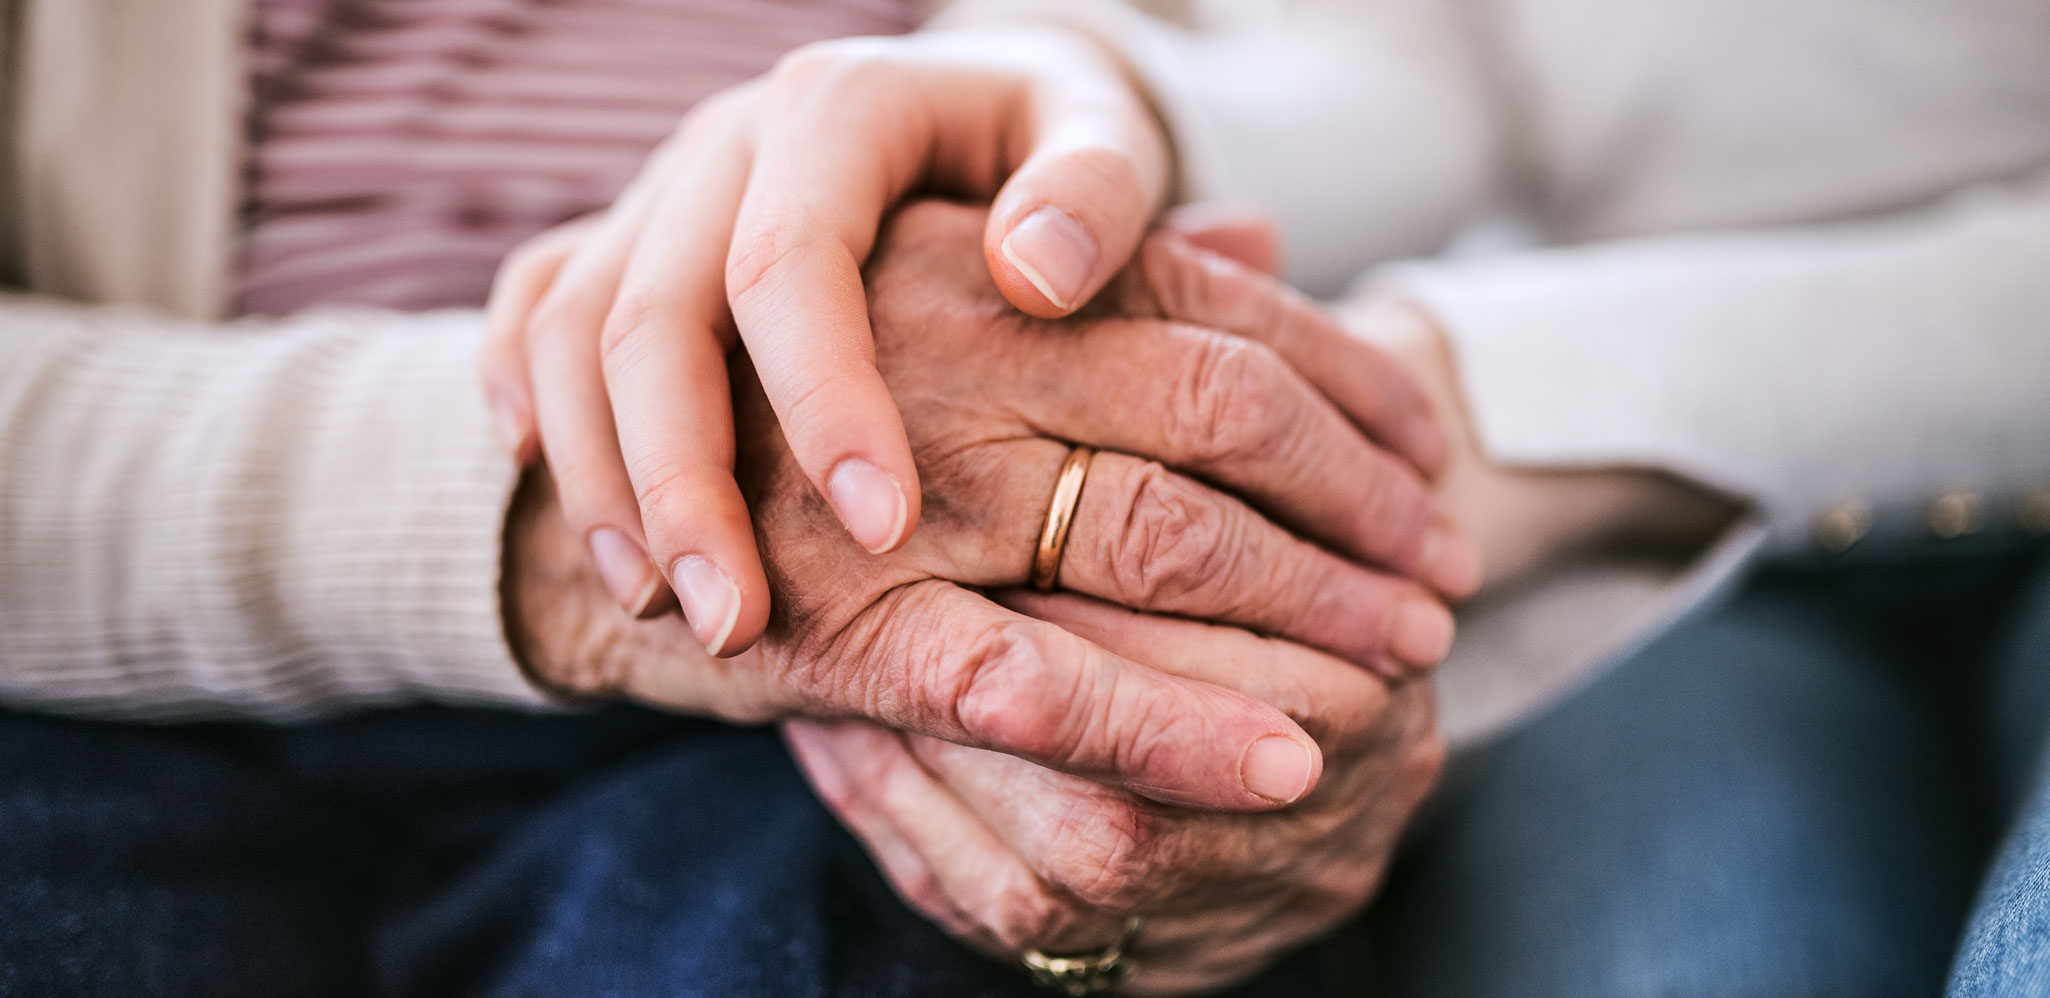 A close up photo of one pair of hands clasping another set of elderly hands